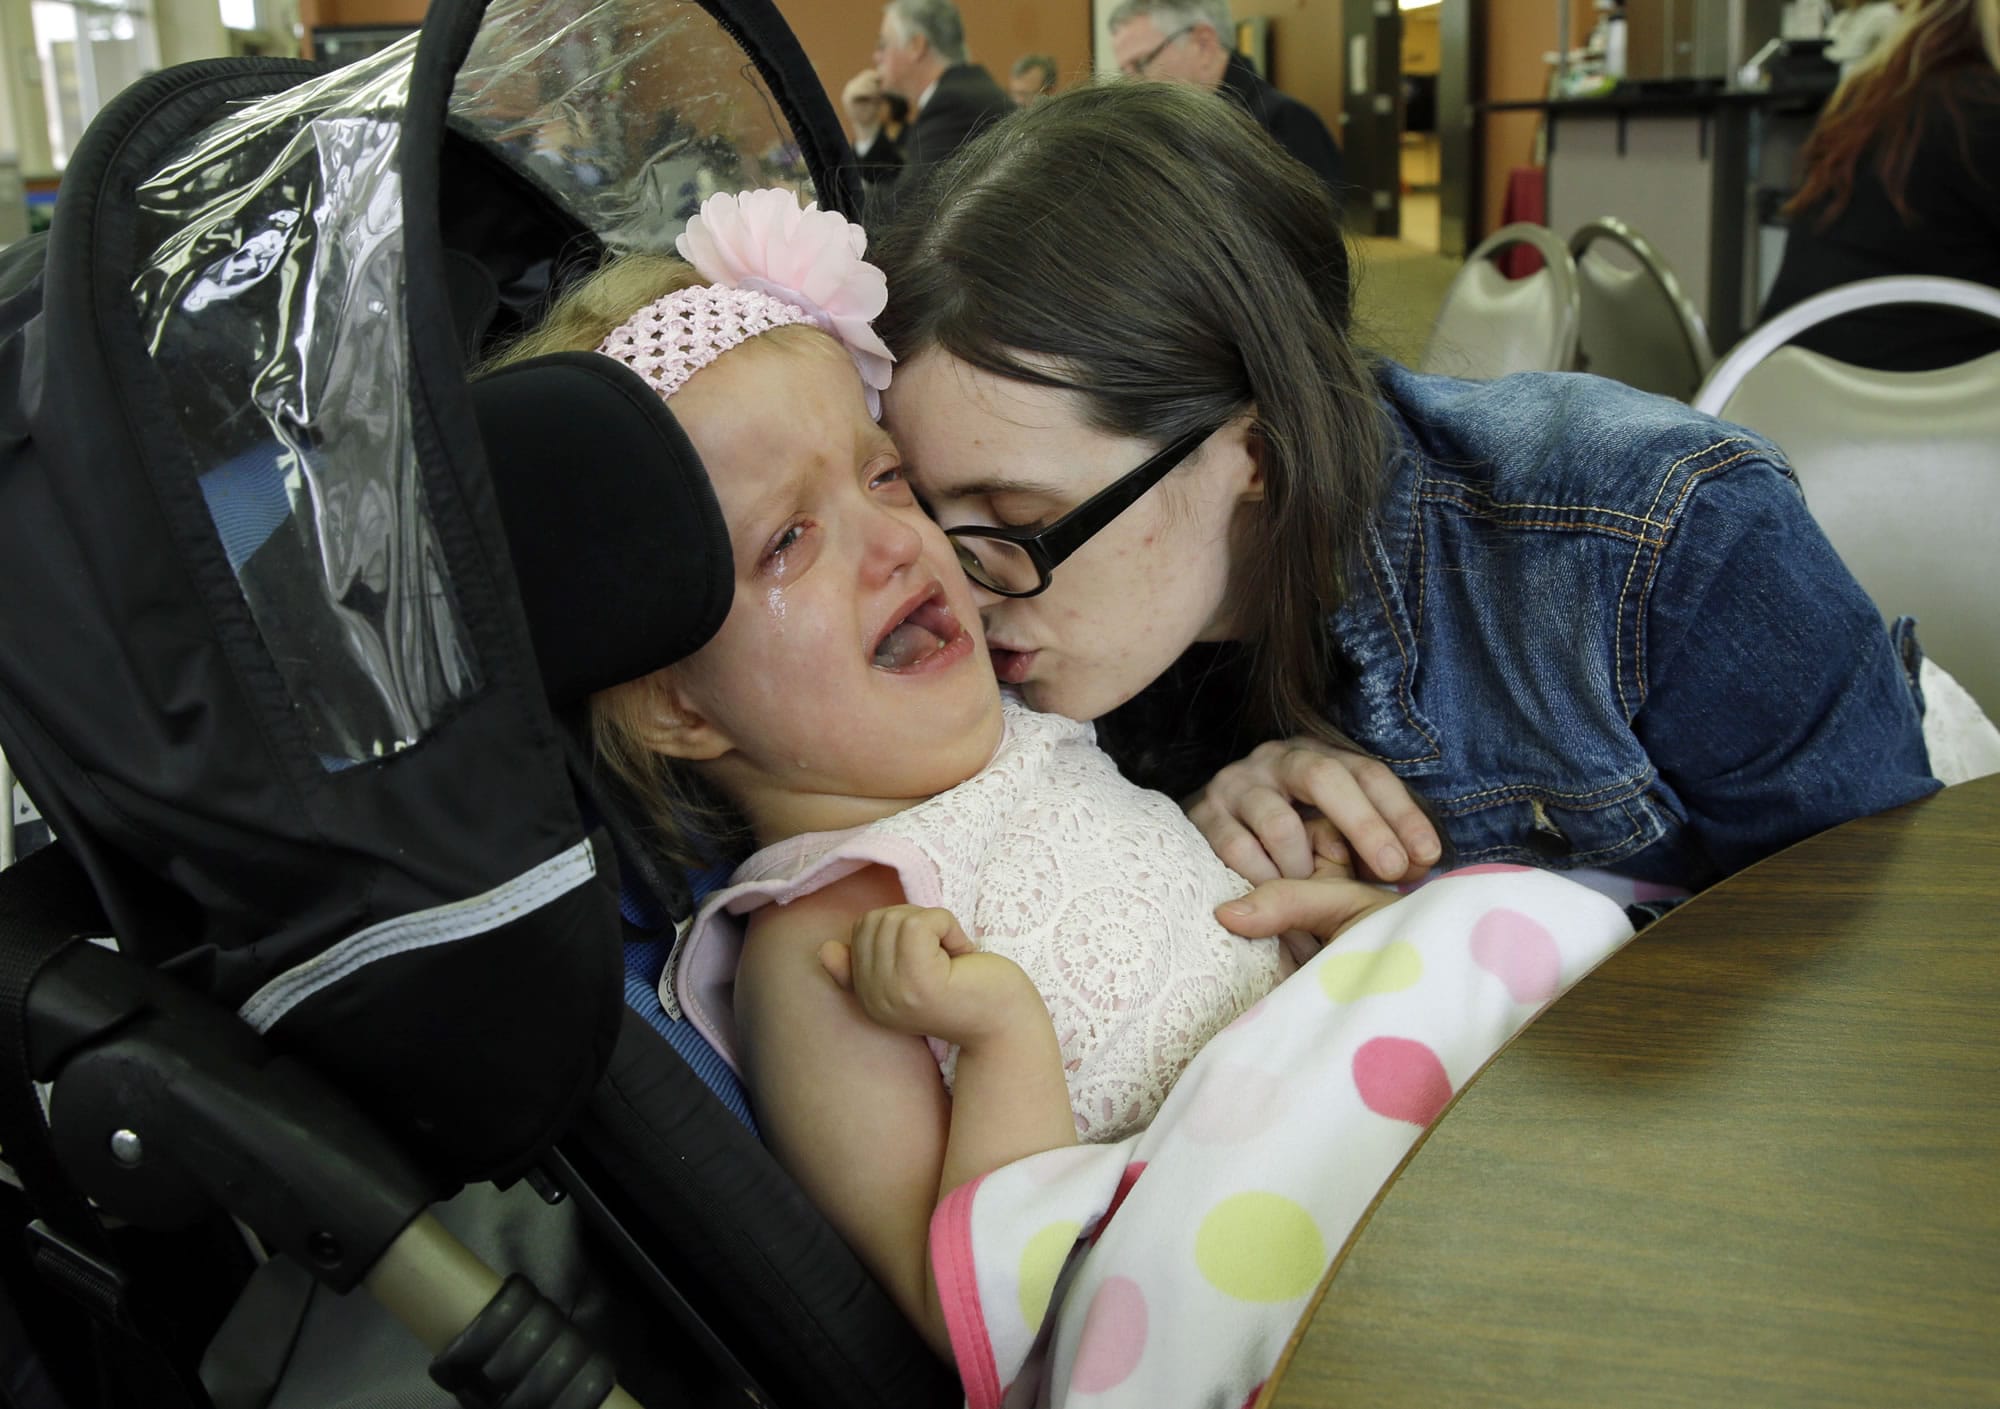 In this Tuesday, March 28, 2017 photo, Meagan Holt comforts her daughter Maddie after they attended a hearing at the Capitol in Olympia, Wash., for House Bill 1060, which would allow parents or guardians to administer medical marijuana to children while at school or on a school bus. Maddie has a terminal genetic disease called Zellweger Syndrome, and used to have hour-long seizures, but Holt says that Maddie has found relief after treatment with cannabis oil and other pharmaceuticals. (AP Photo/Ted S.